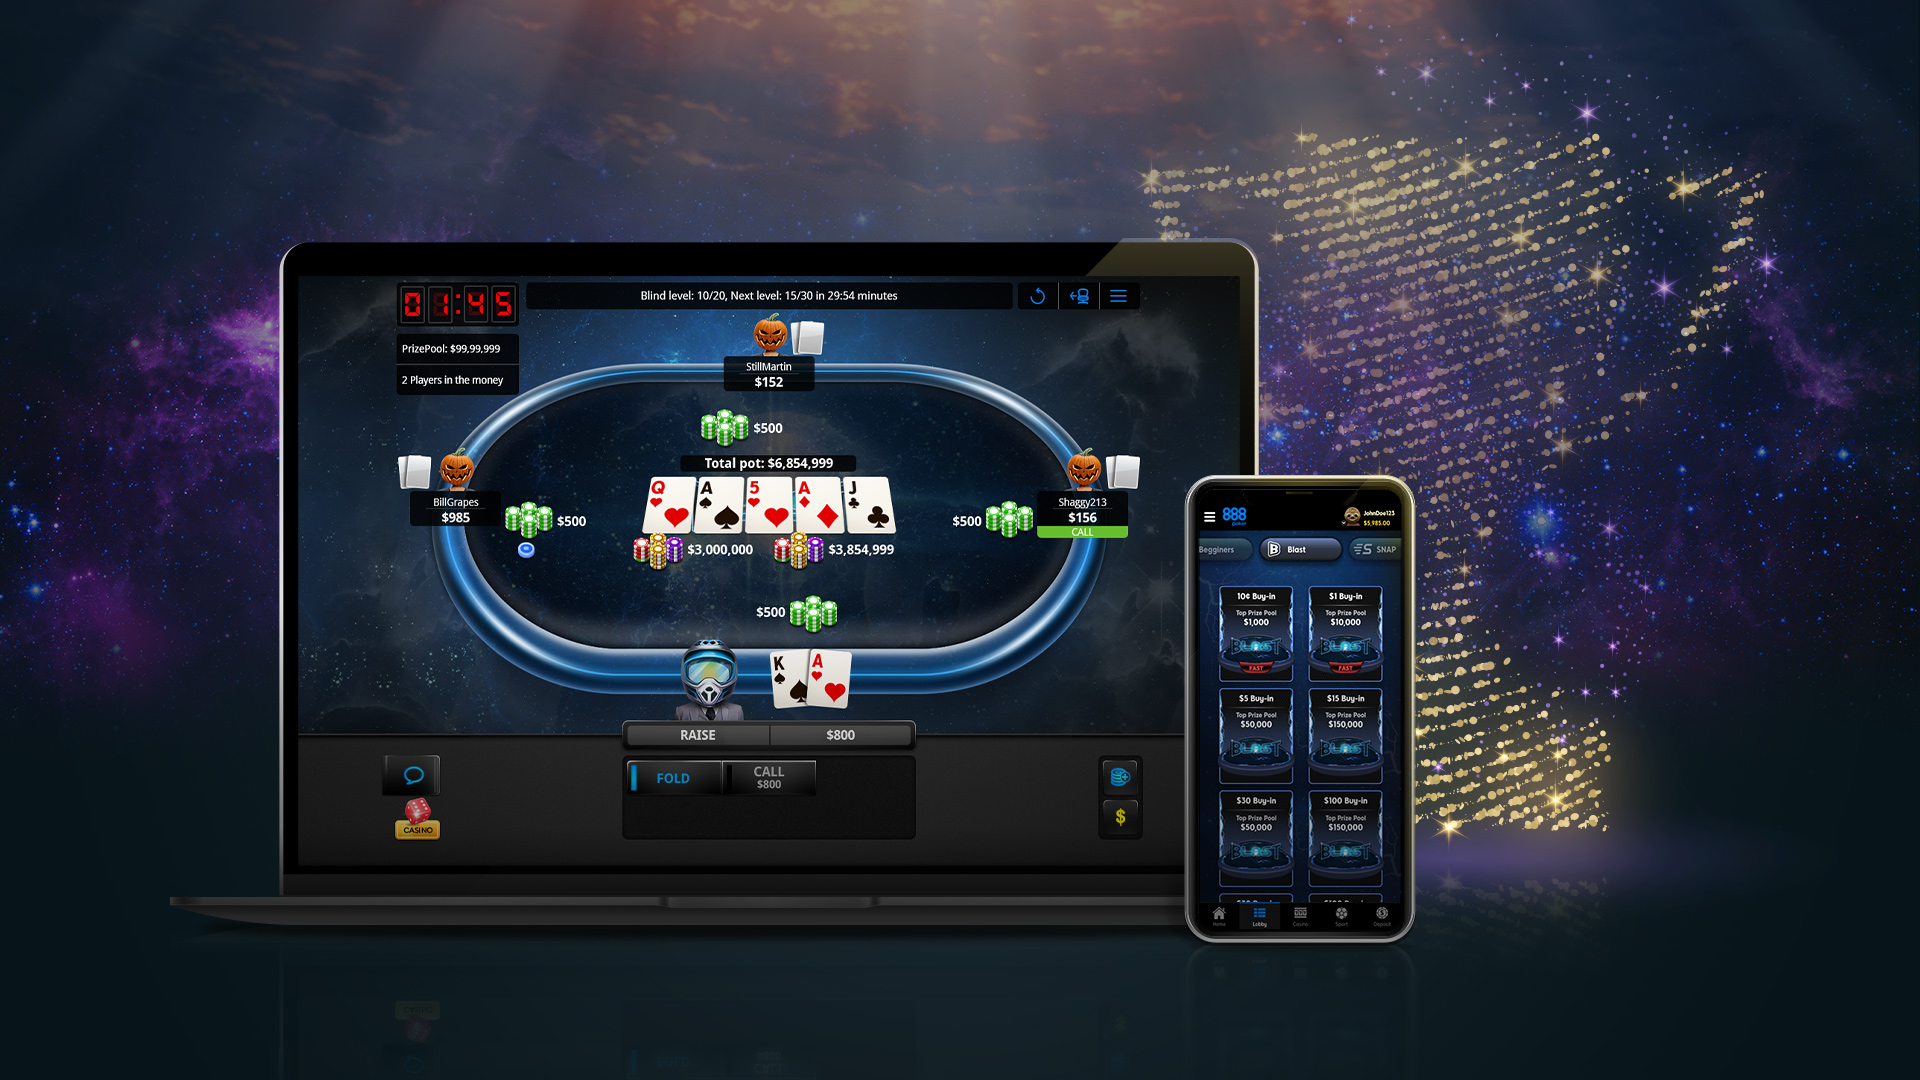 Paving Descriptive B.C. How to install 888poker mobile app on Android